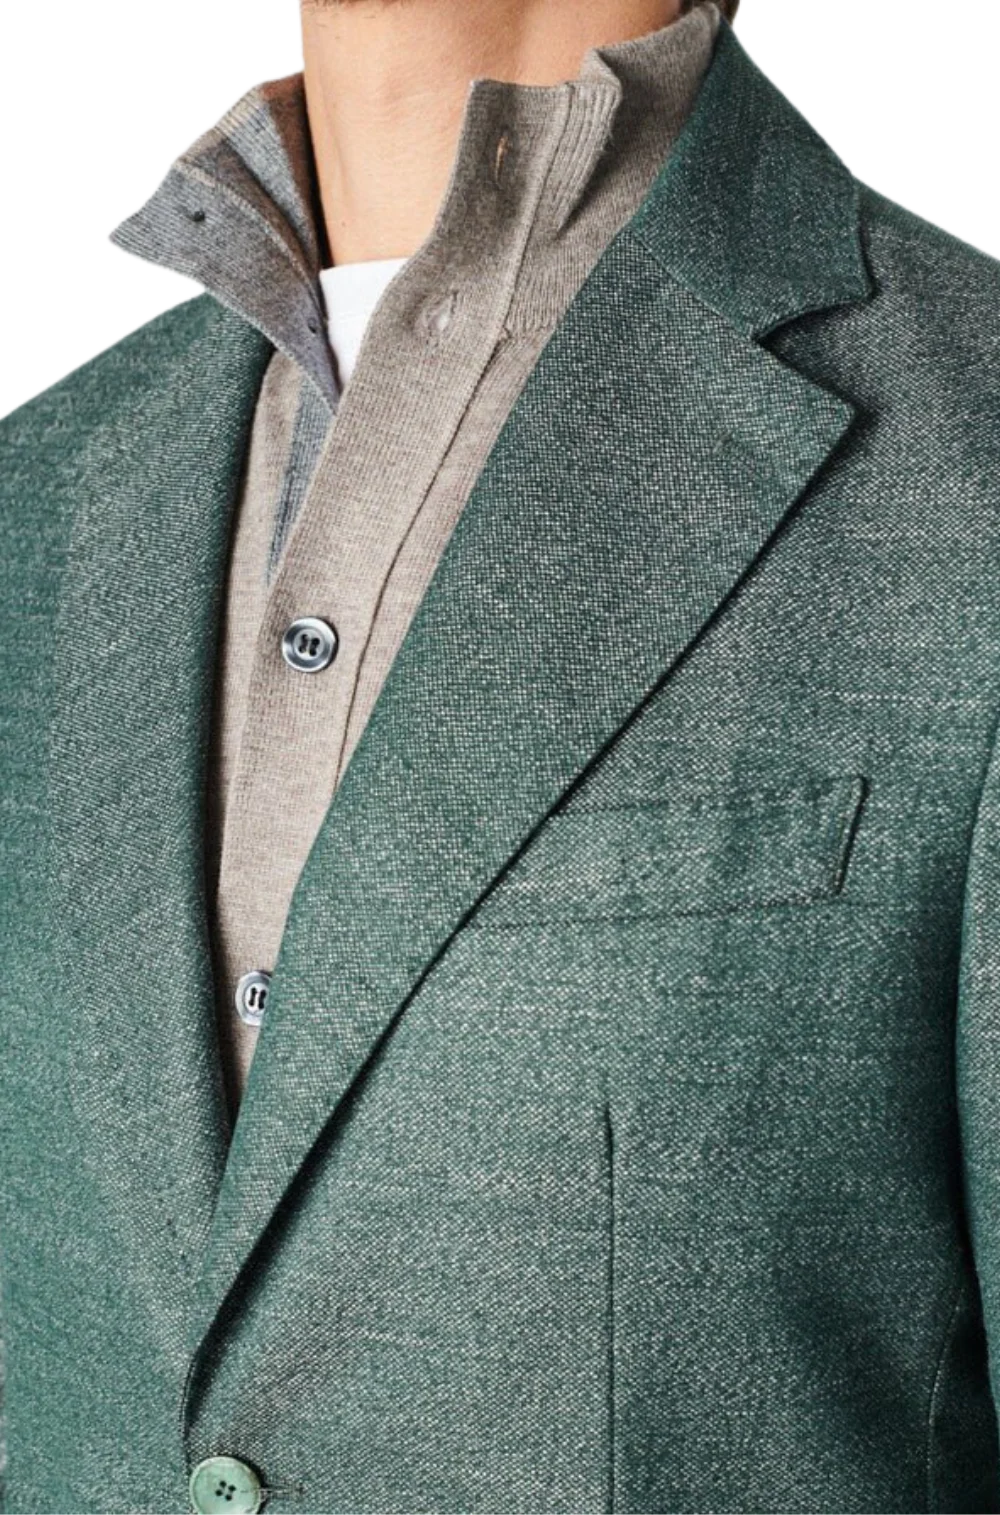 Men's Fusaro Austine Melange Wool Blend Jacket in Green (21089) - available in-store, 337 Monty Naicker Street, Durban CBD or online at Omar's Tailors & Outfitters online store.   A men's fashion curation for South African men - established in 1911.